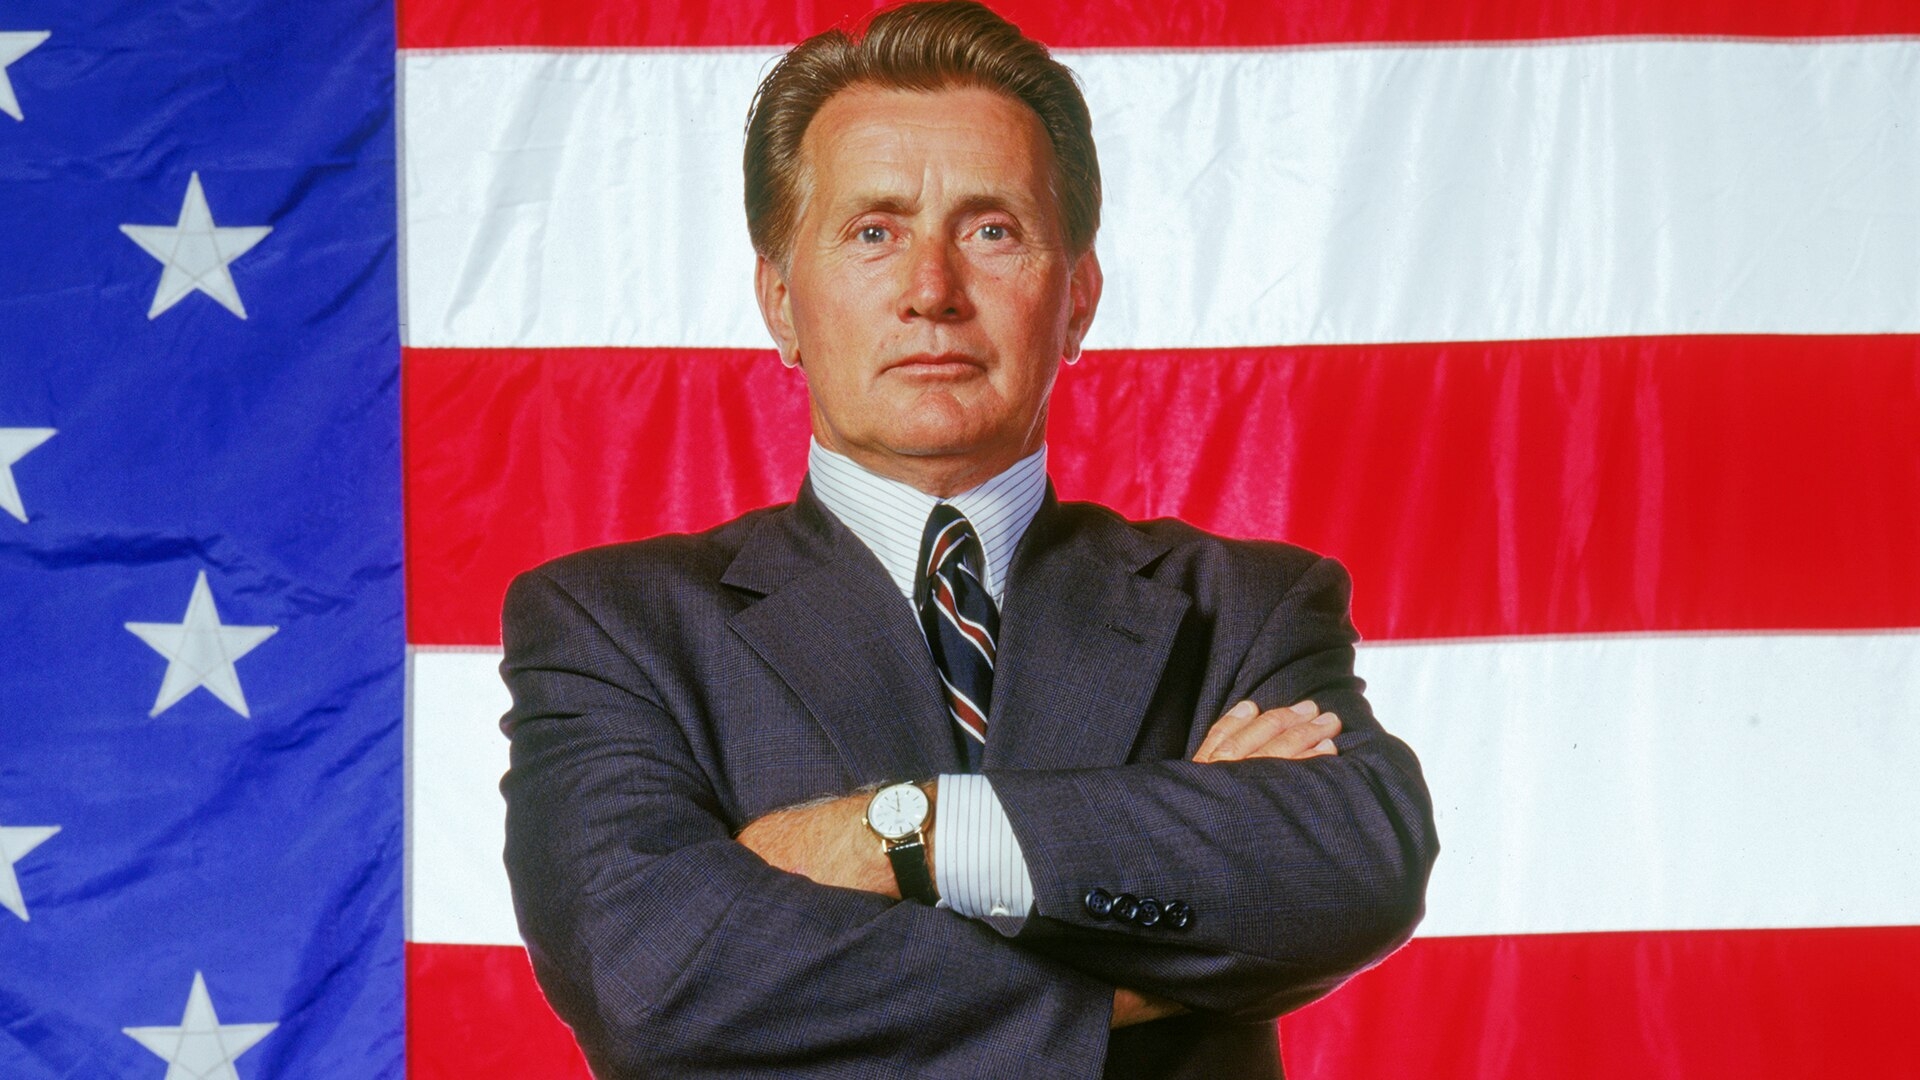 The West Wing - All 4